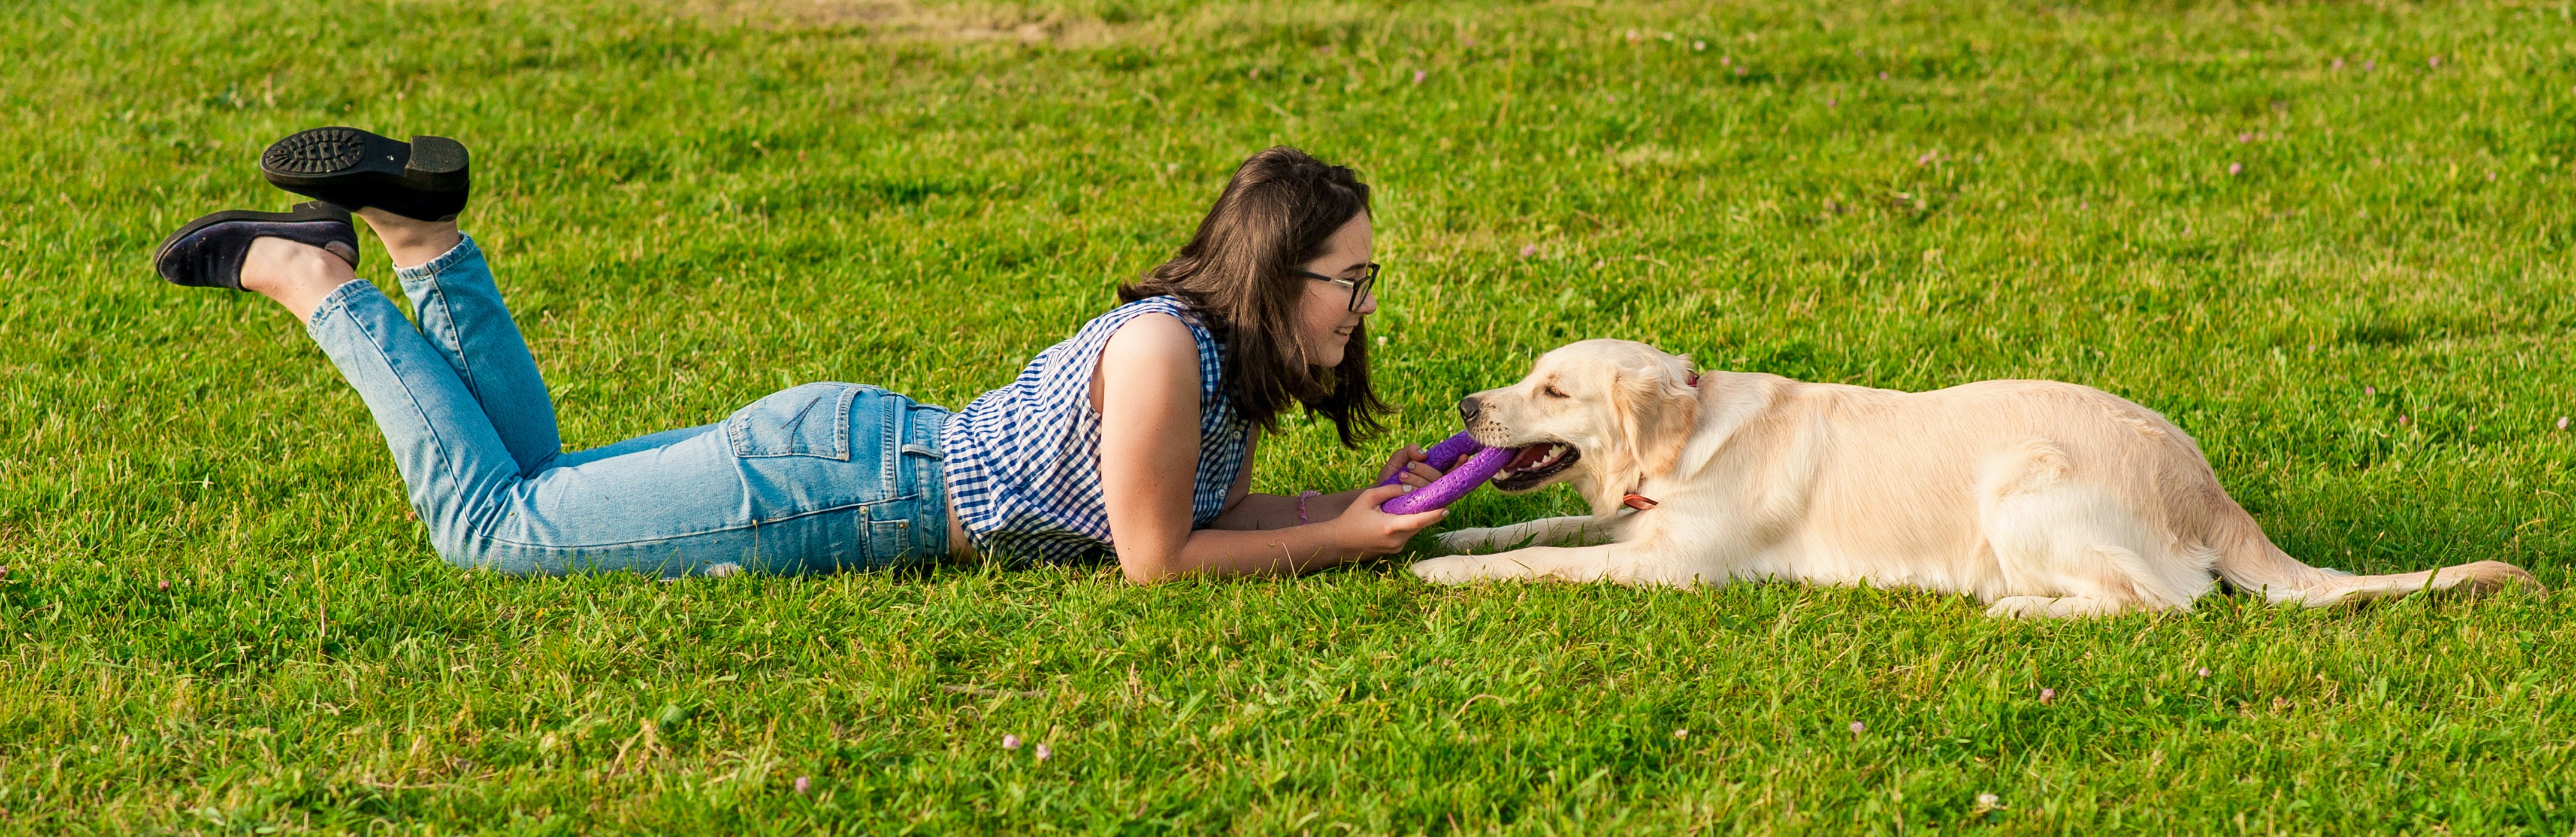 Woman laying on her stomach playing tug of war with a purple chew toy and her golden retriever on a green grass lawn.